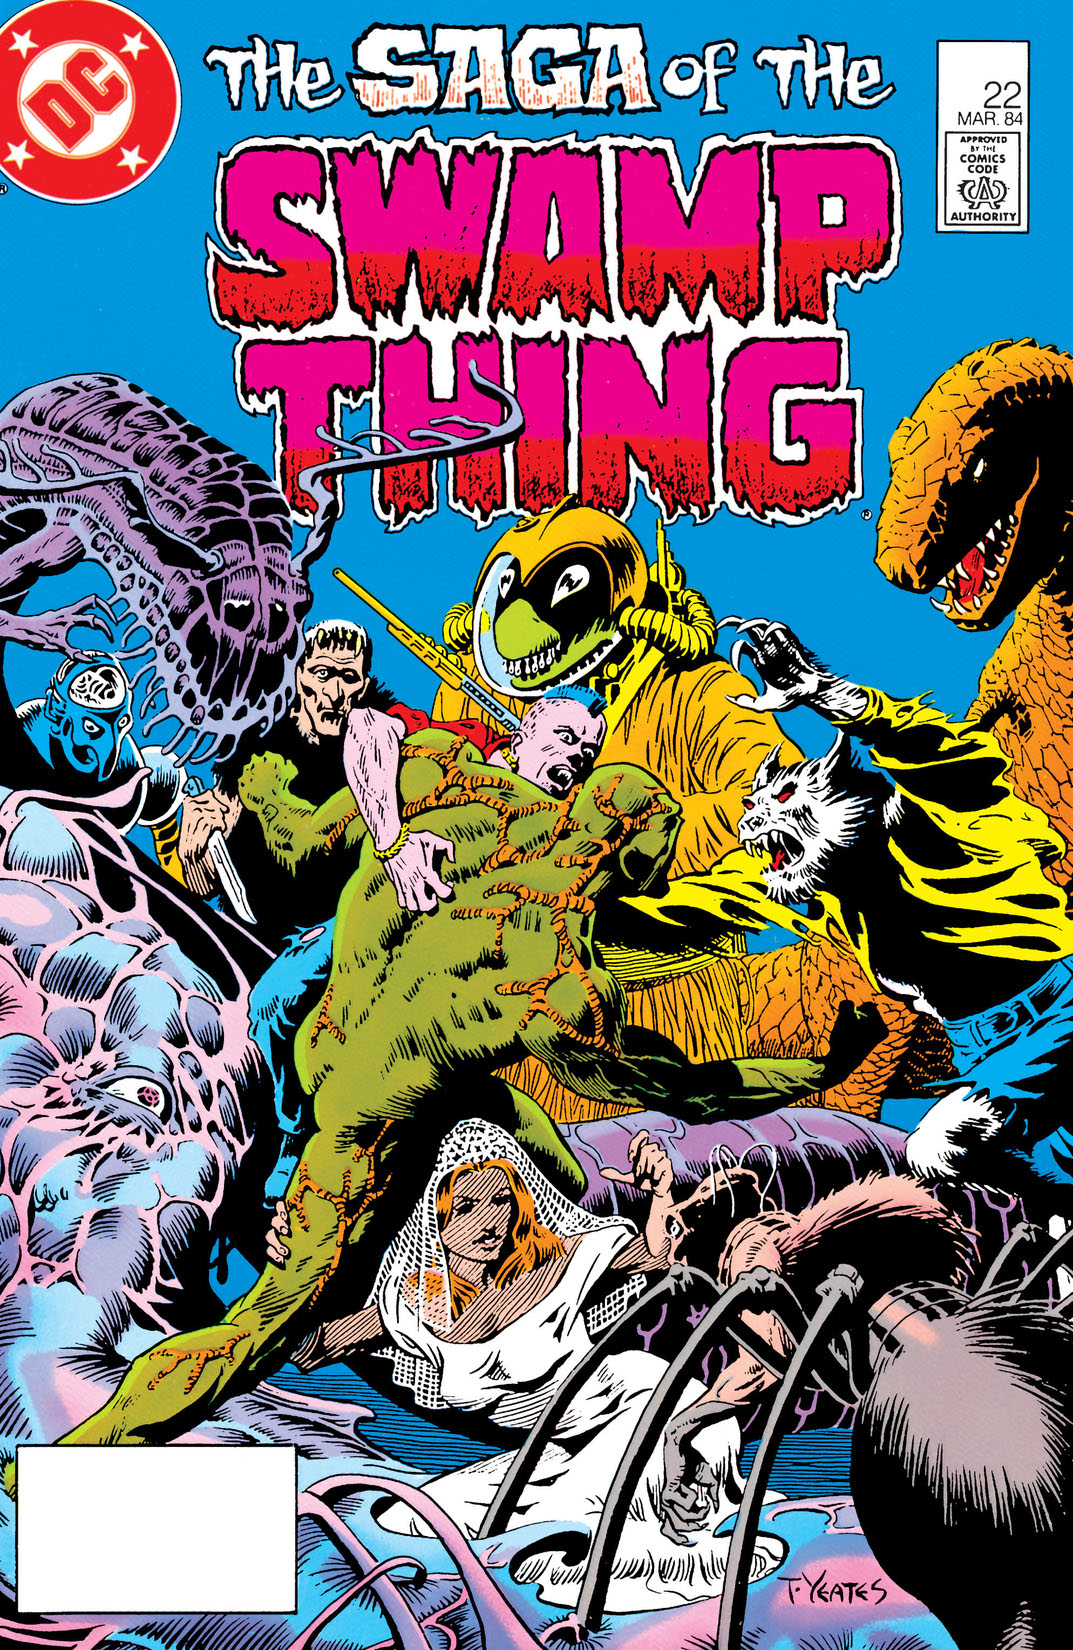 The Saga of the Swamp Thing (1982-) #22 preview images